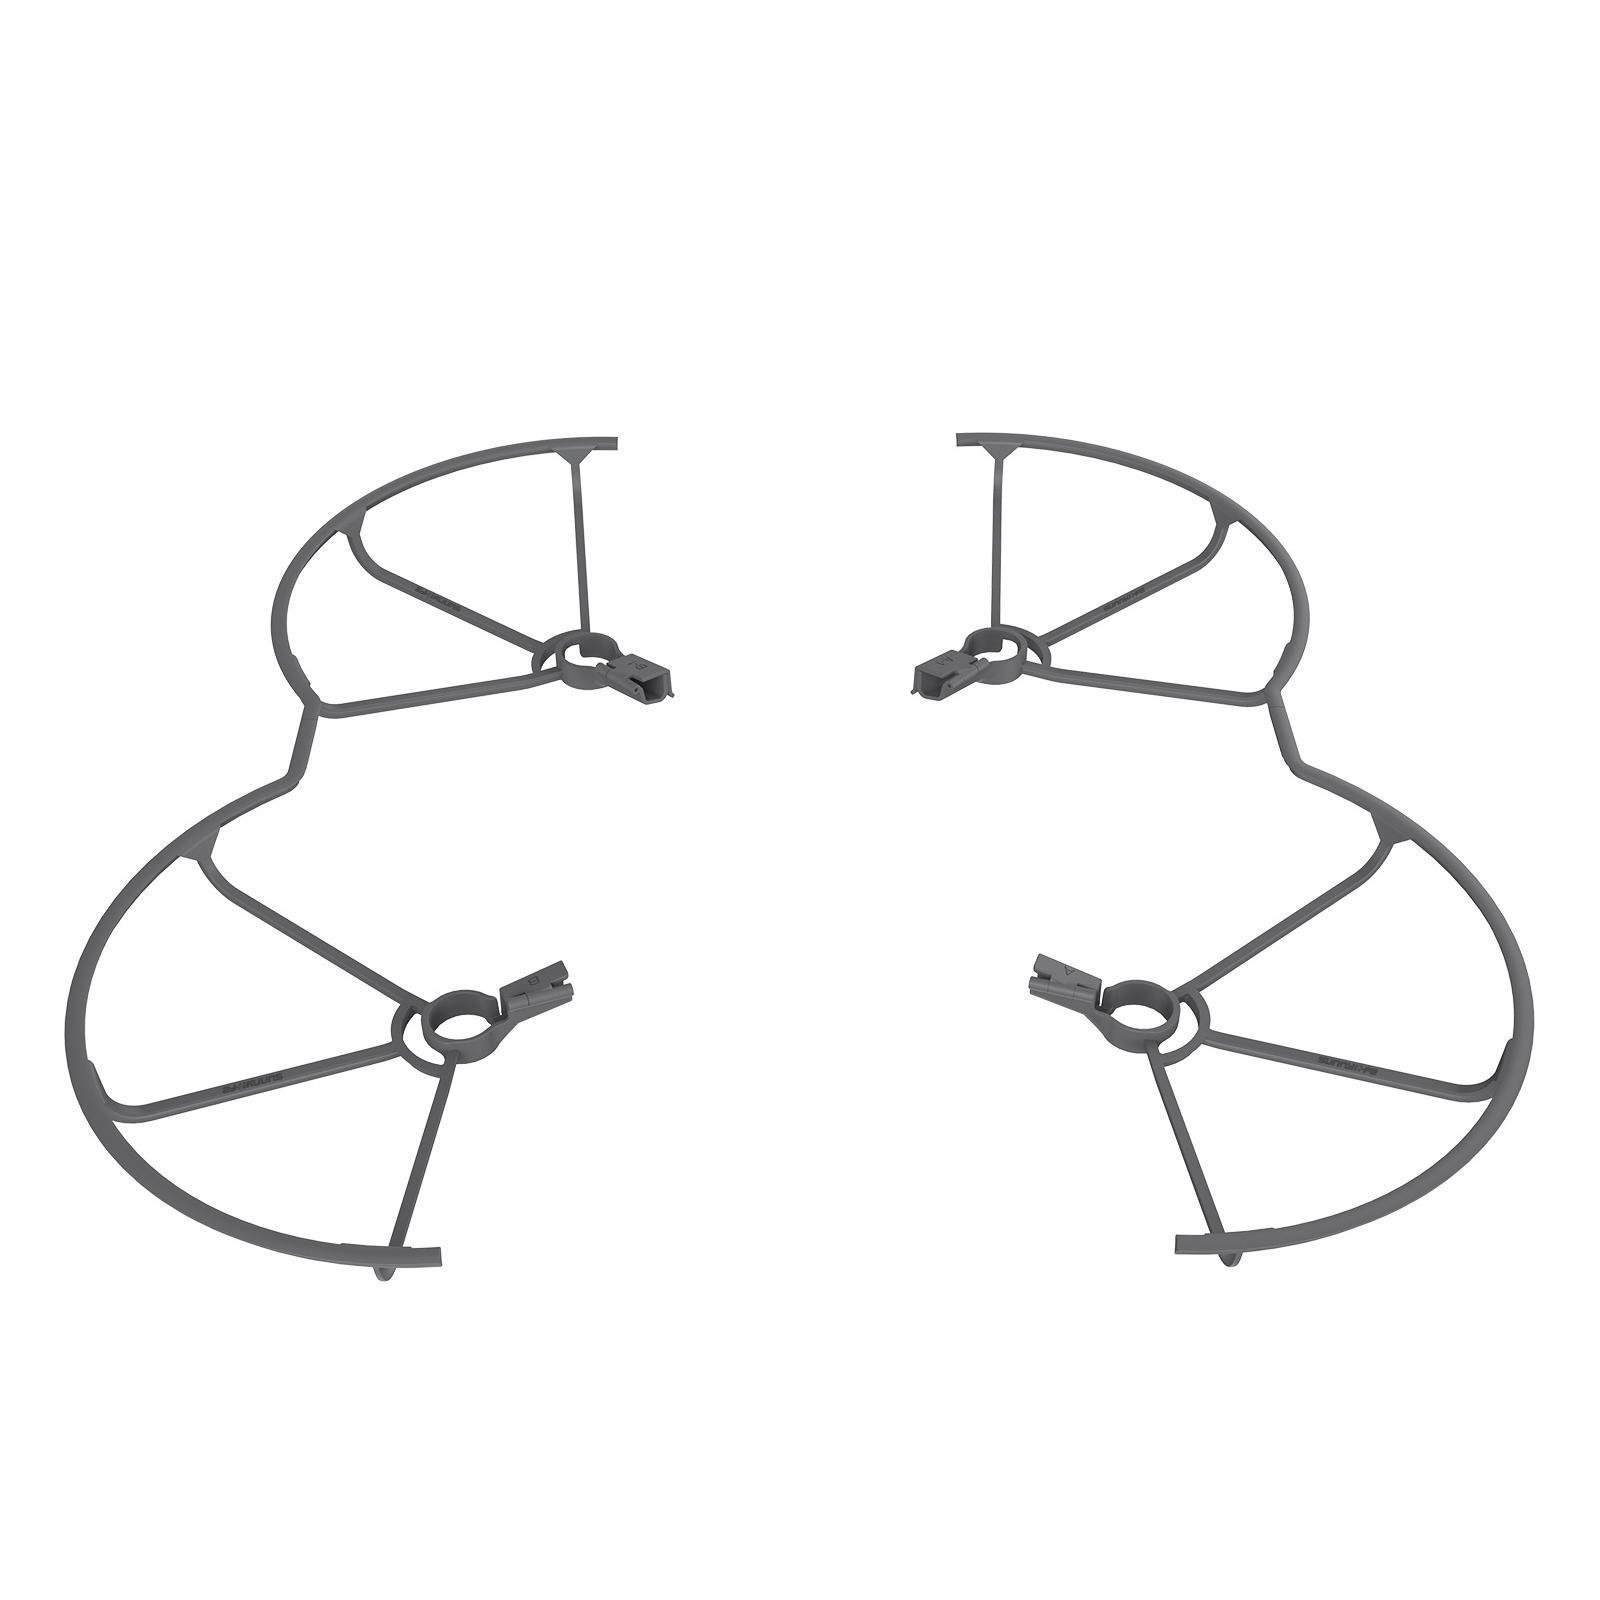 2 Pieces Propeller Protector Guard Quick Release Protective for 3